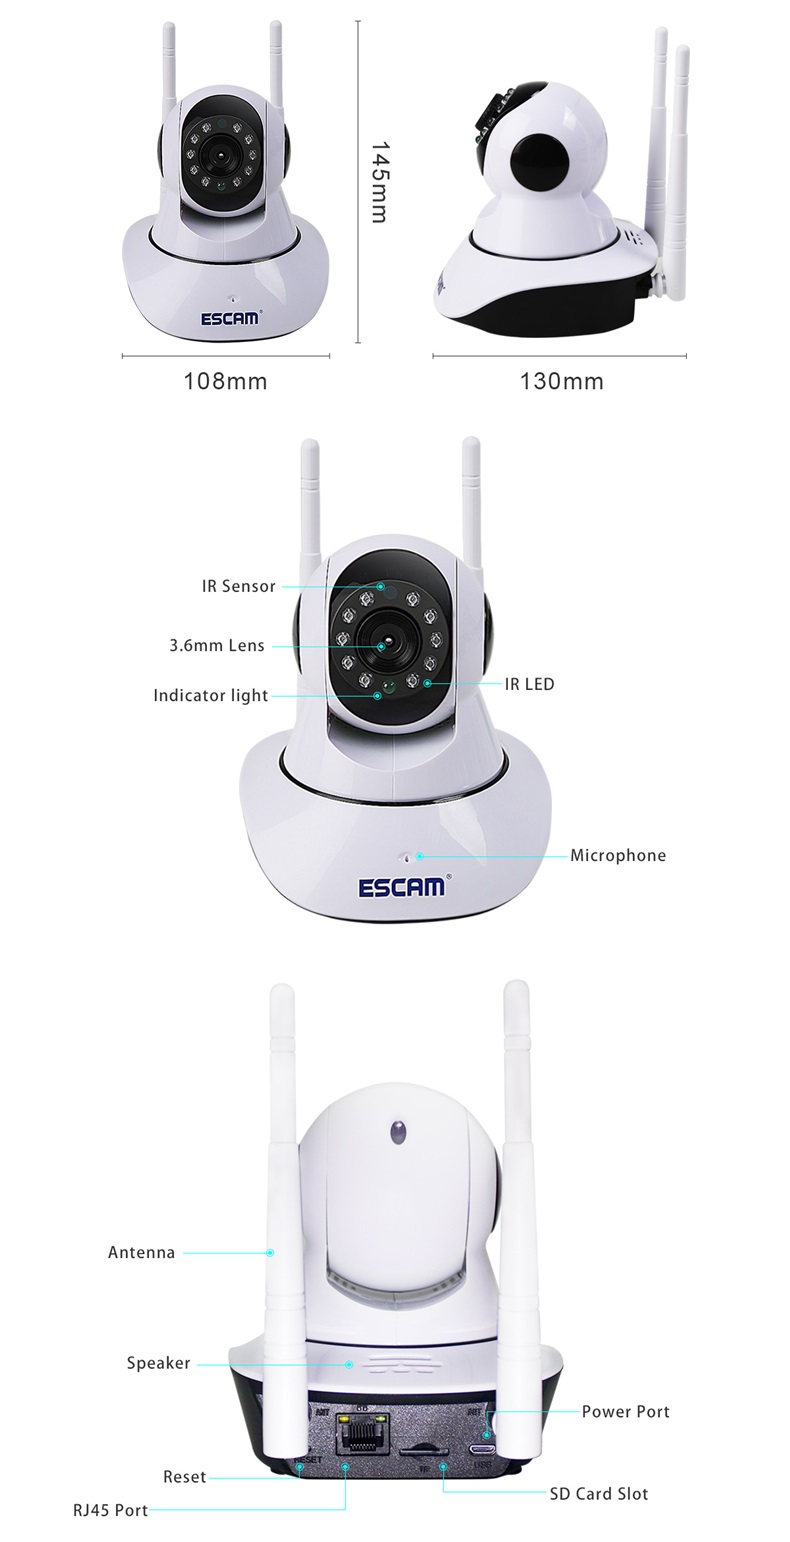 ESCAM G02 Dual Antenna 720P Pan/Tilt WiFi IP IR Camera Support ONVIF Max Up to 128GB Video Monitor 38